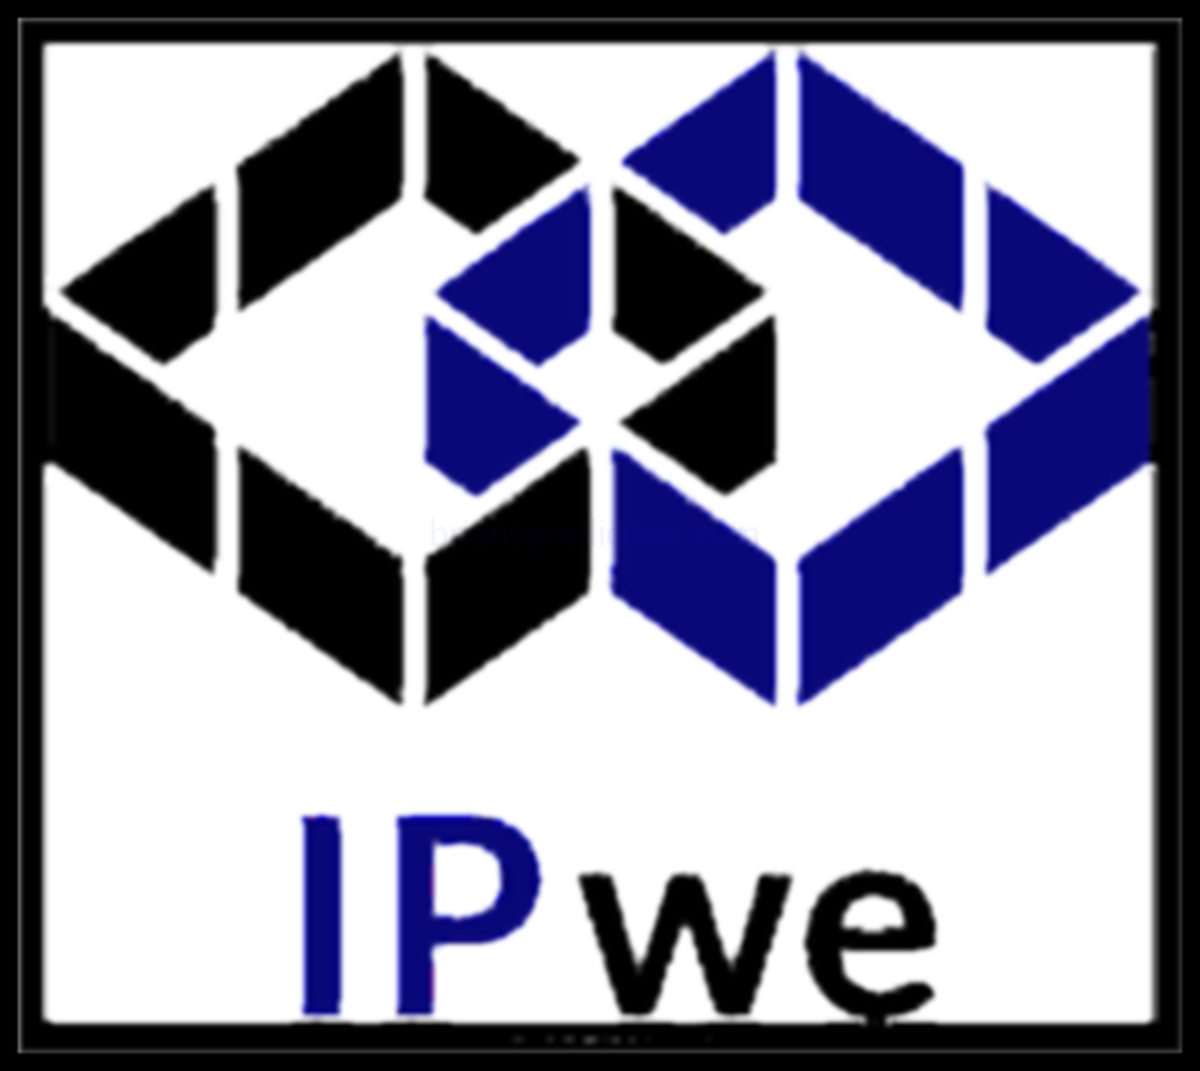 Logo IPwe 1 Matthew George Whitaker and World Patent Marketing Inc secrets you have got to see before they are pulled from the web Logo IPwe 1    psychic Brian Ladd~0
Logo IPwe 1 Matthew George Whitaker and World Patent Marketing Inc secrets you have got to see before they are pulled from the web Logo IPwe 1    psychic Brian Ladd~0
